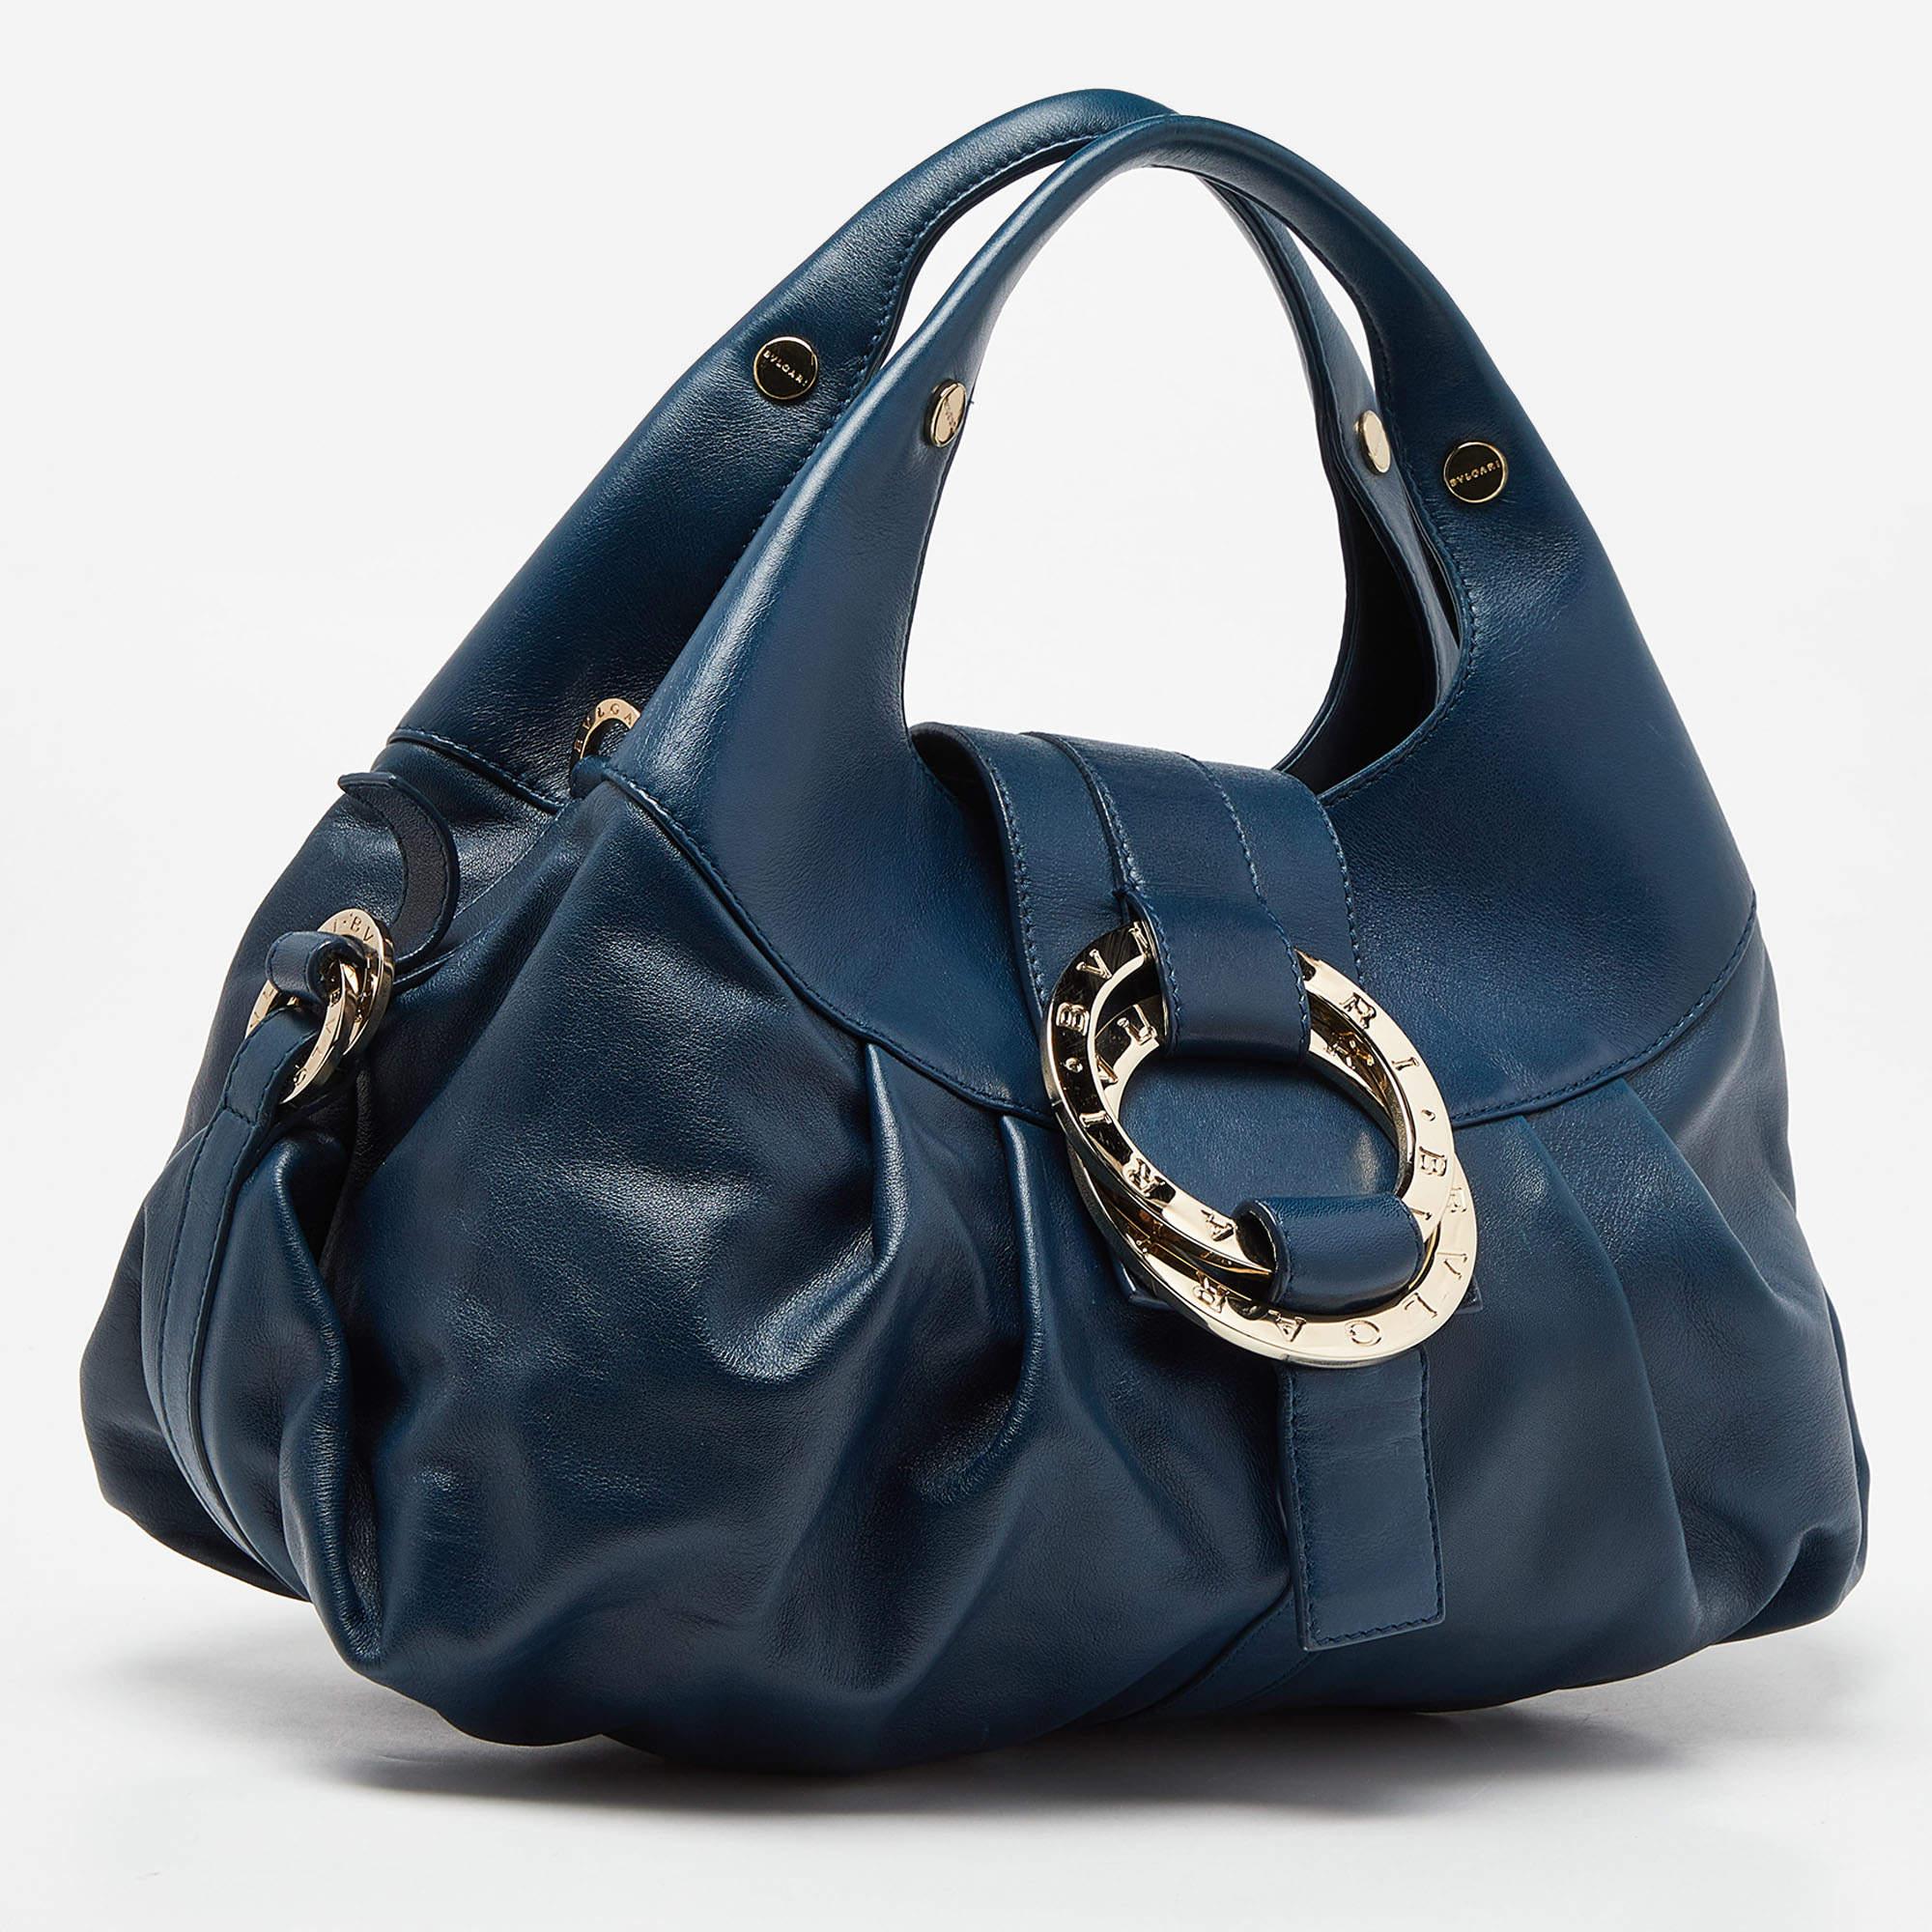 Bvlgari Teal Blue Leather Chandra Hobo For Sale 7